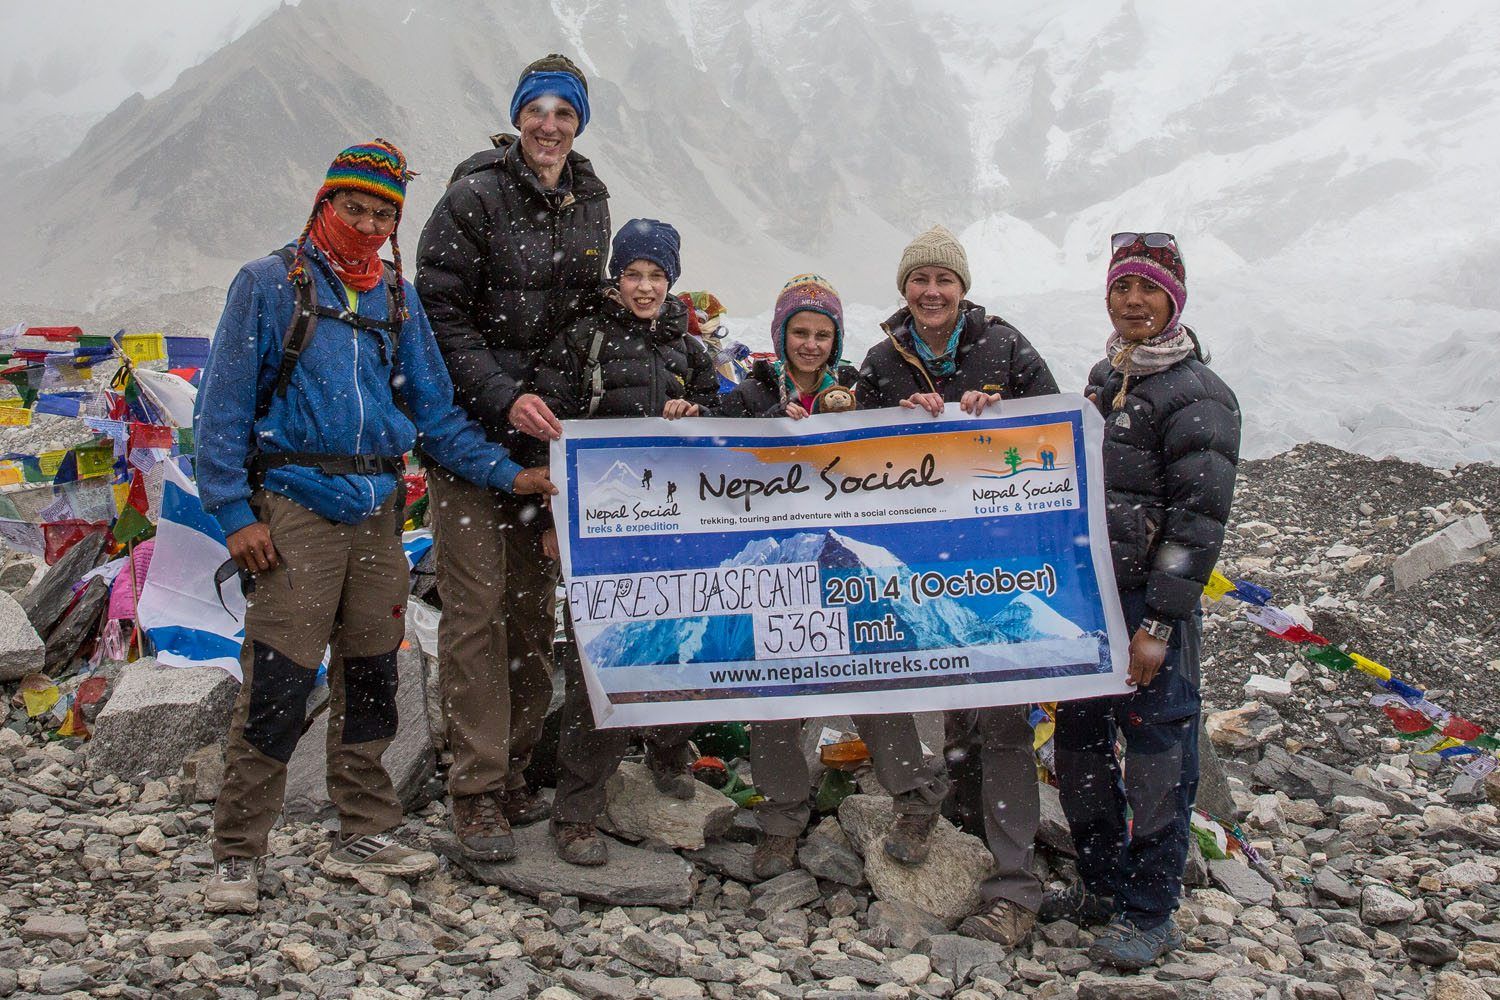 Earth Trekkers at Everest Base Camp